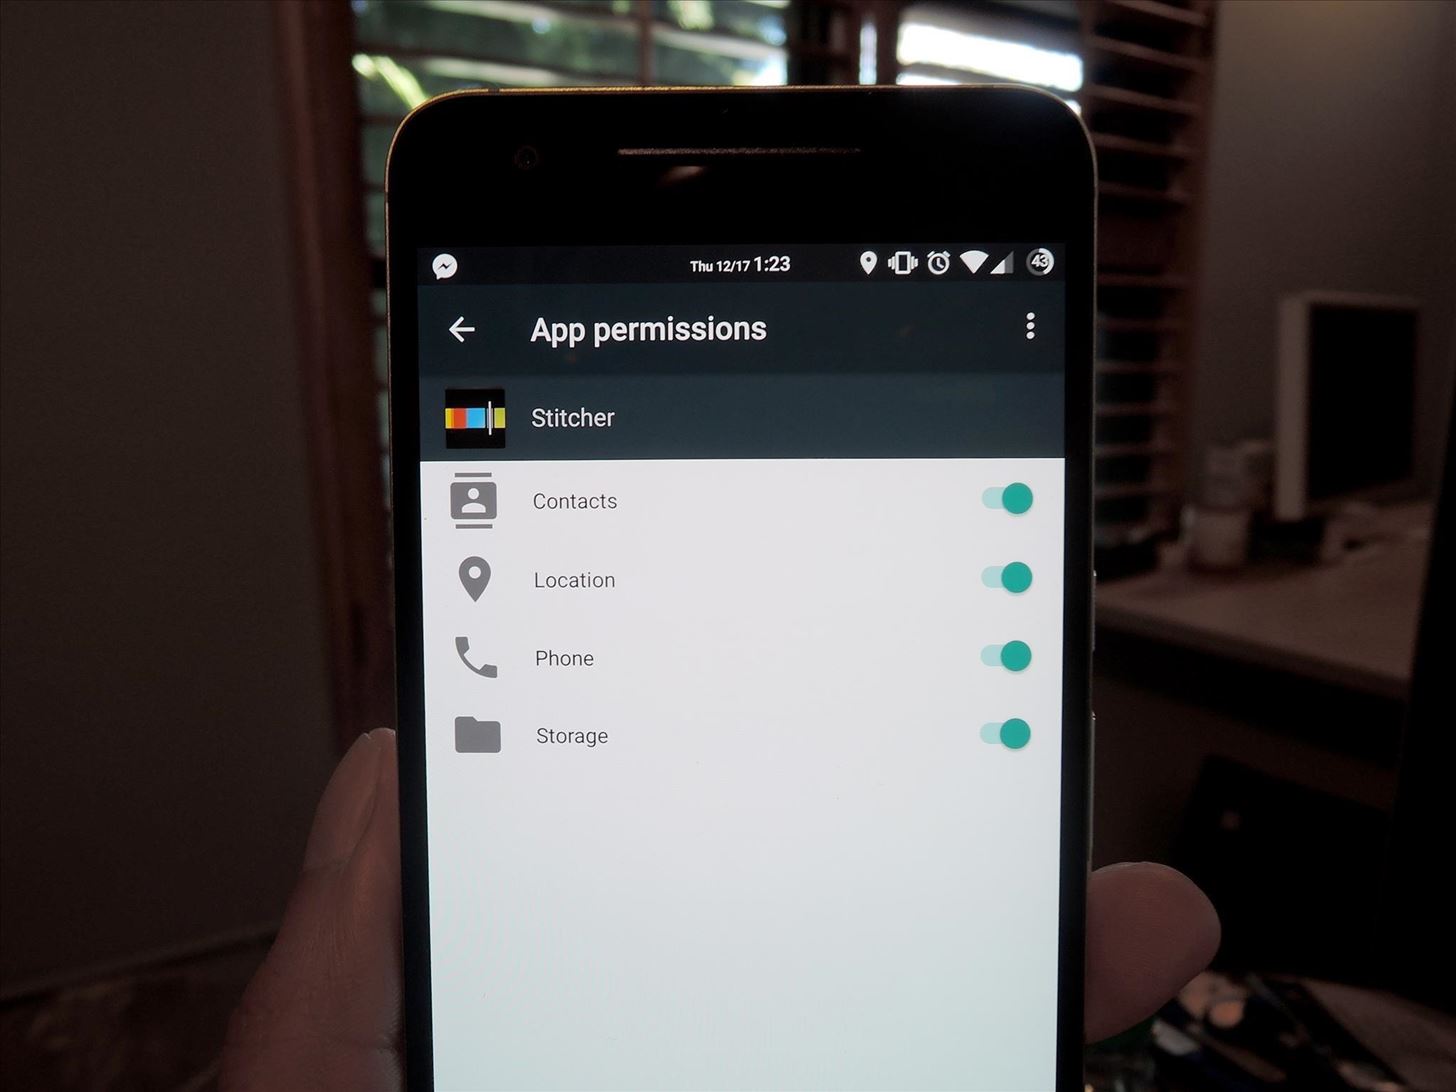 Android 6.1 Rumored to Include Native Split Screen Support